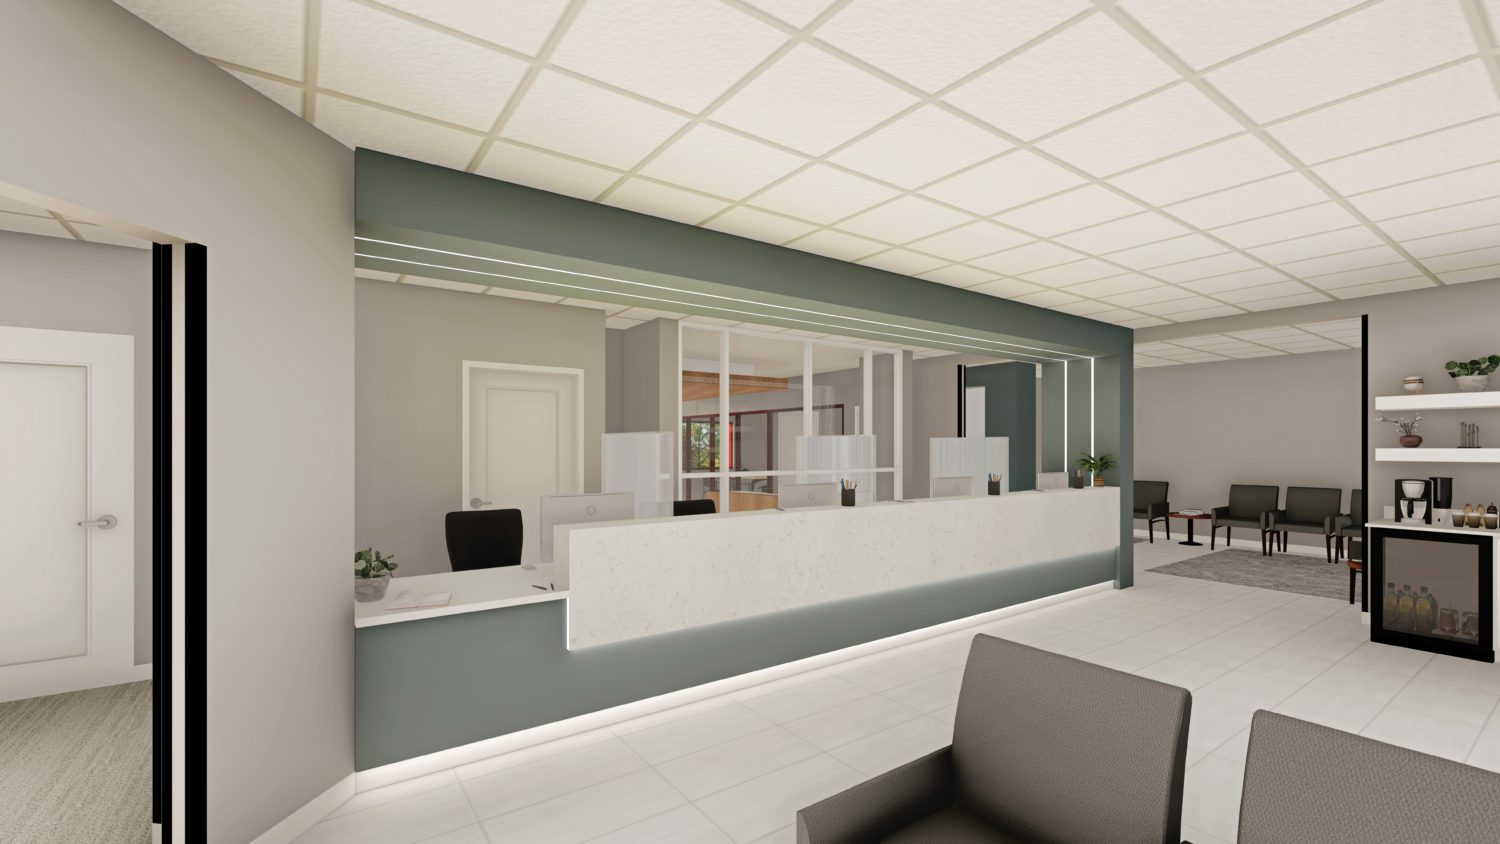 Interior rendering of healthcare facility lobby